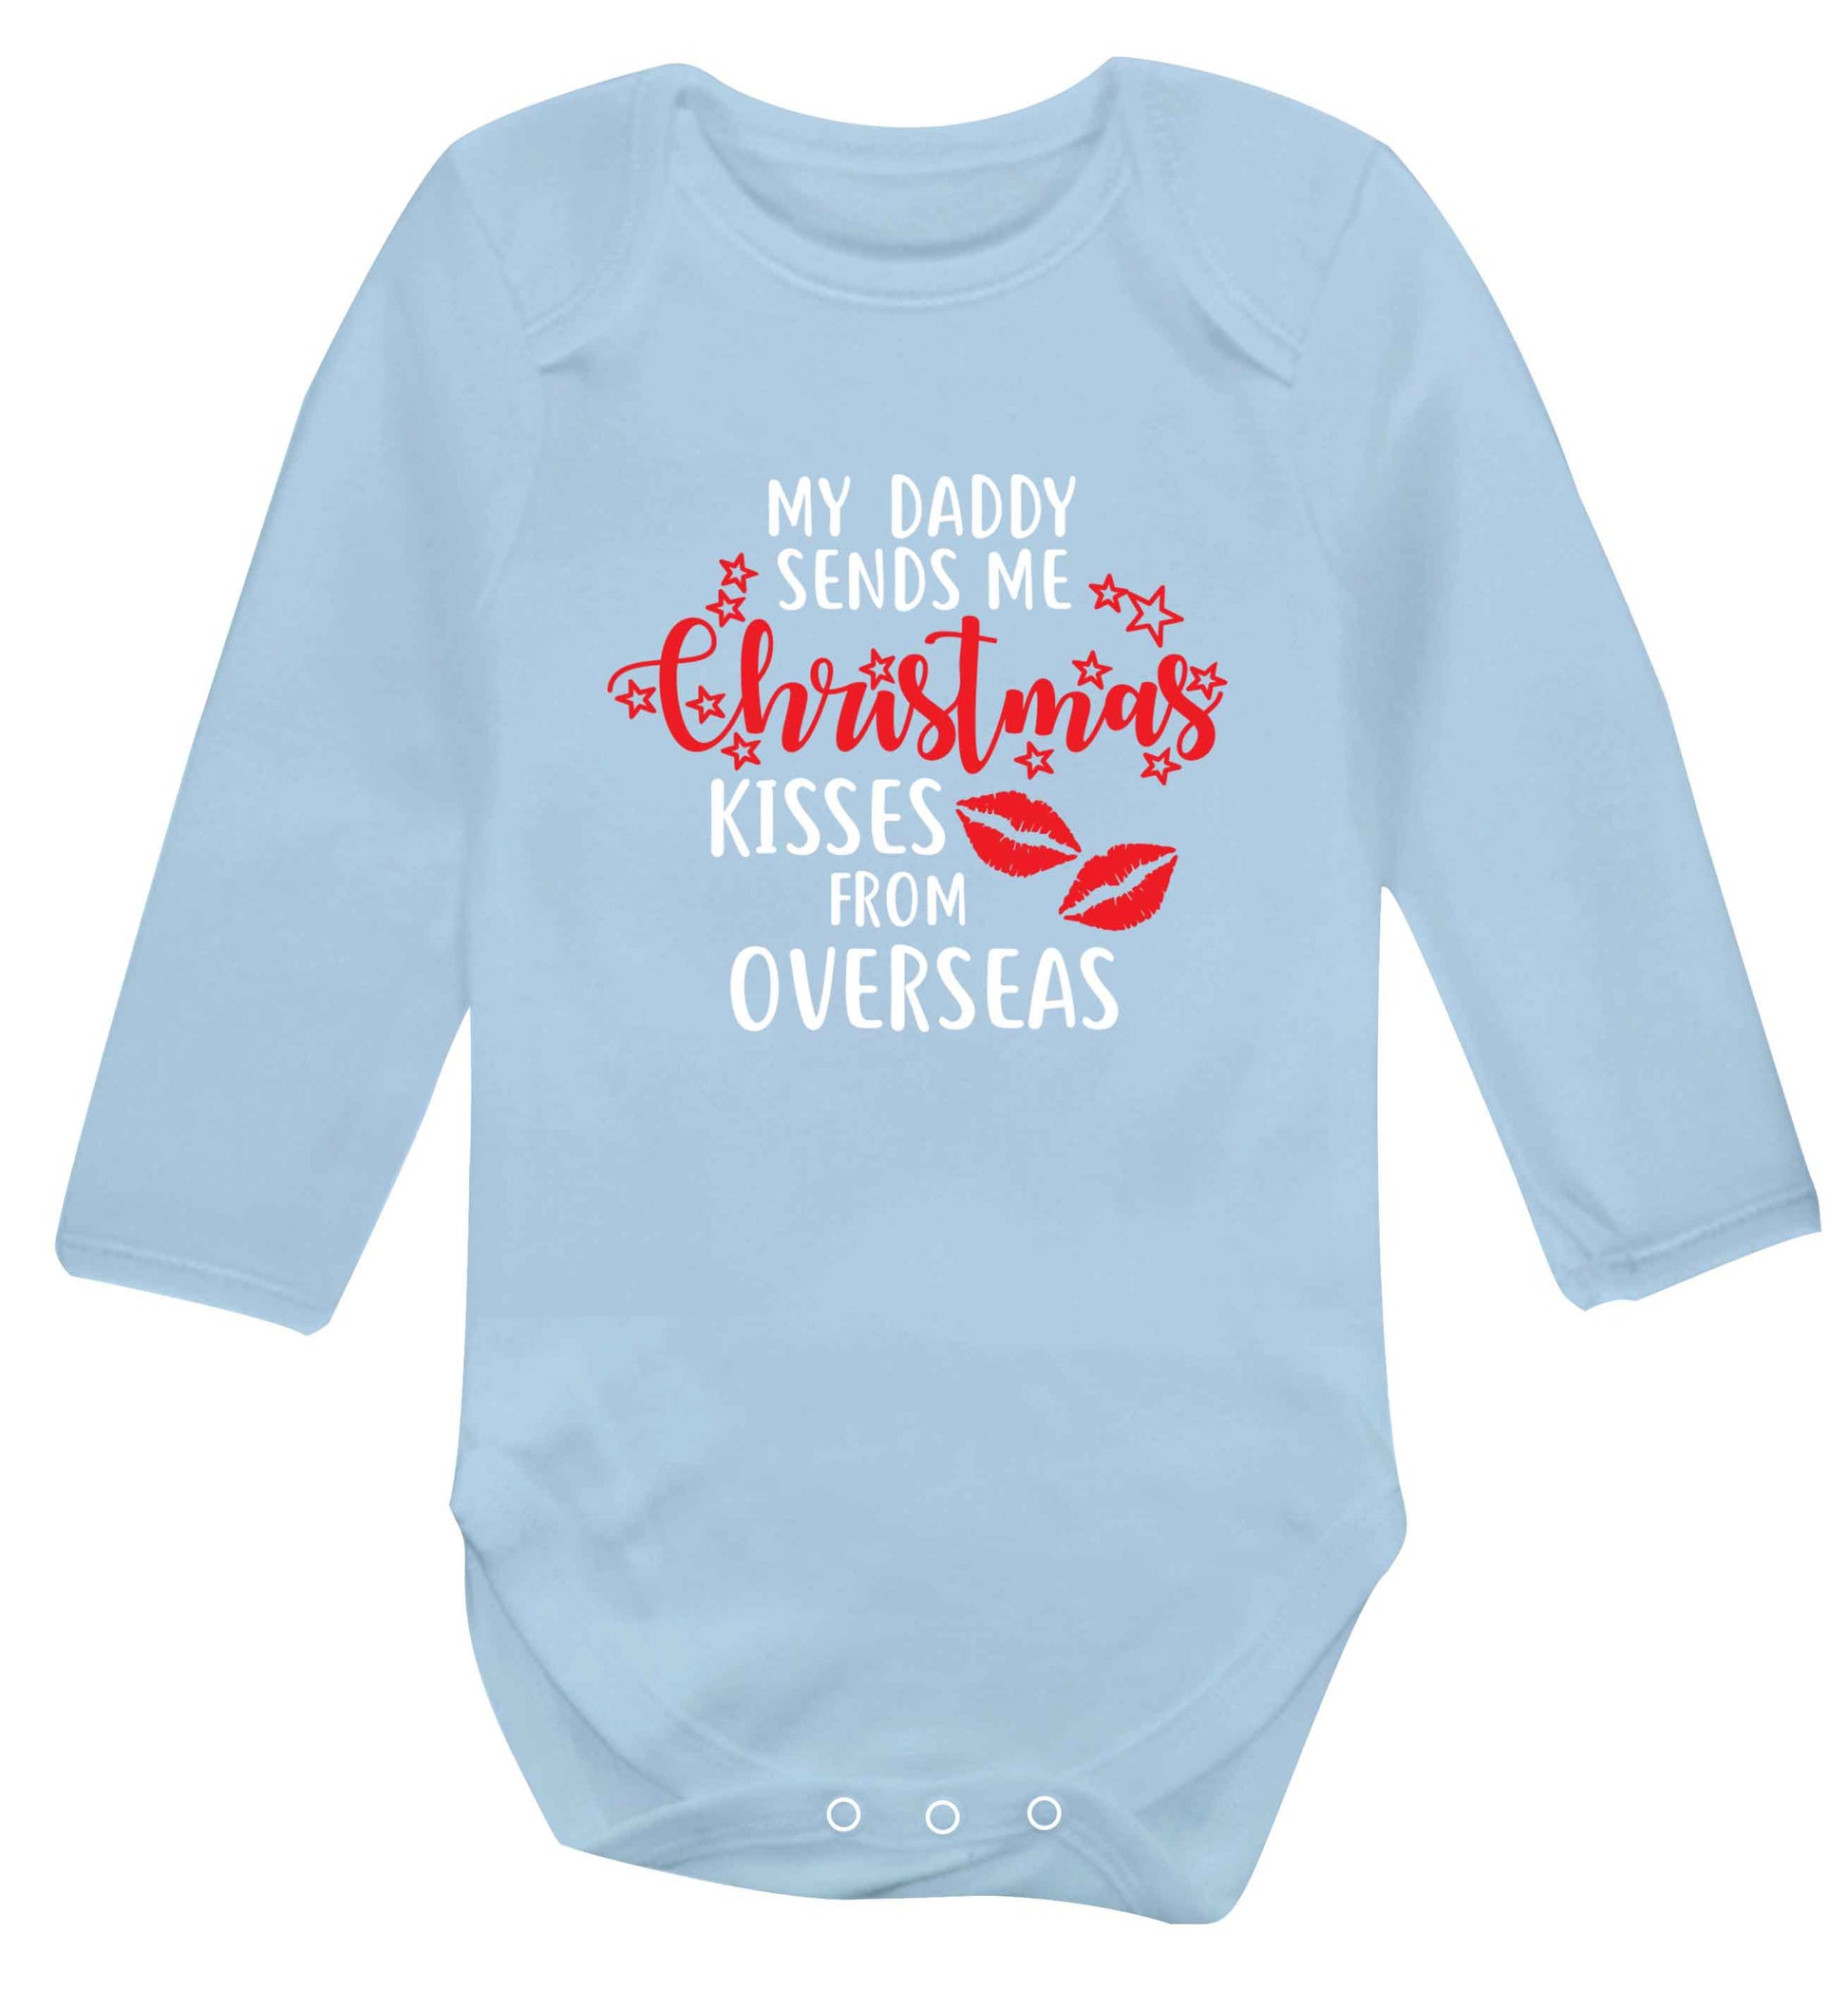 Daddy Christmas Kisses Overseas baby vest long sleeved pale blue 6-12 months